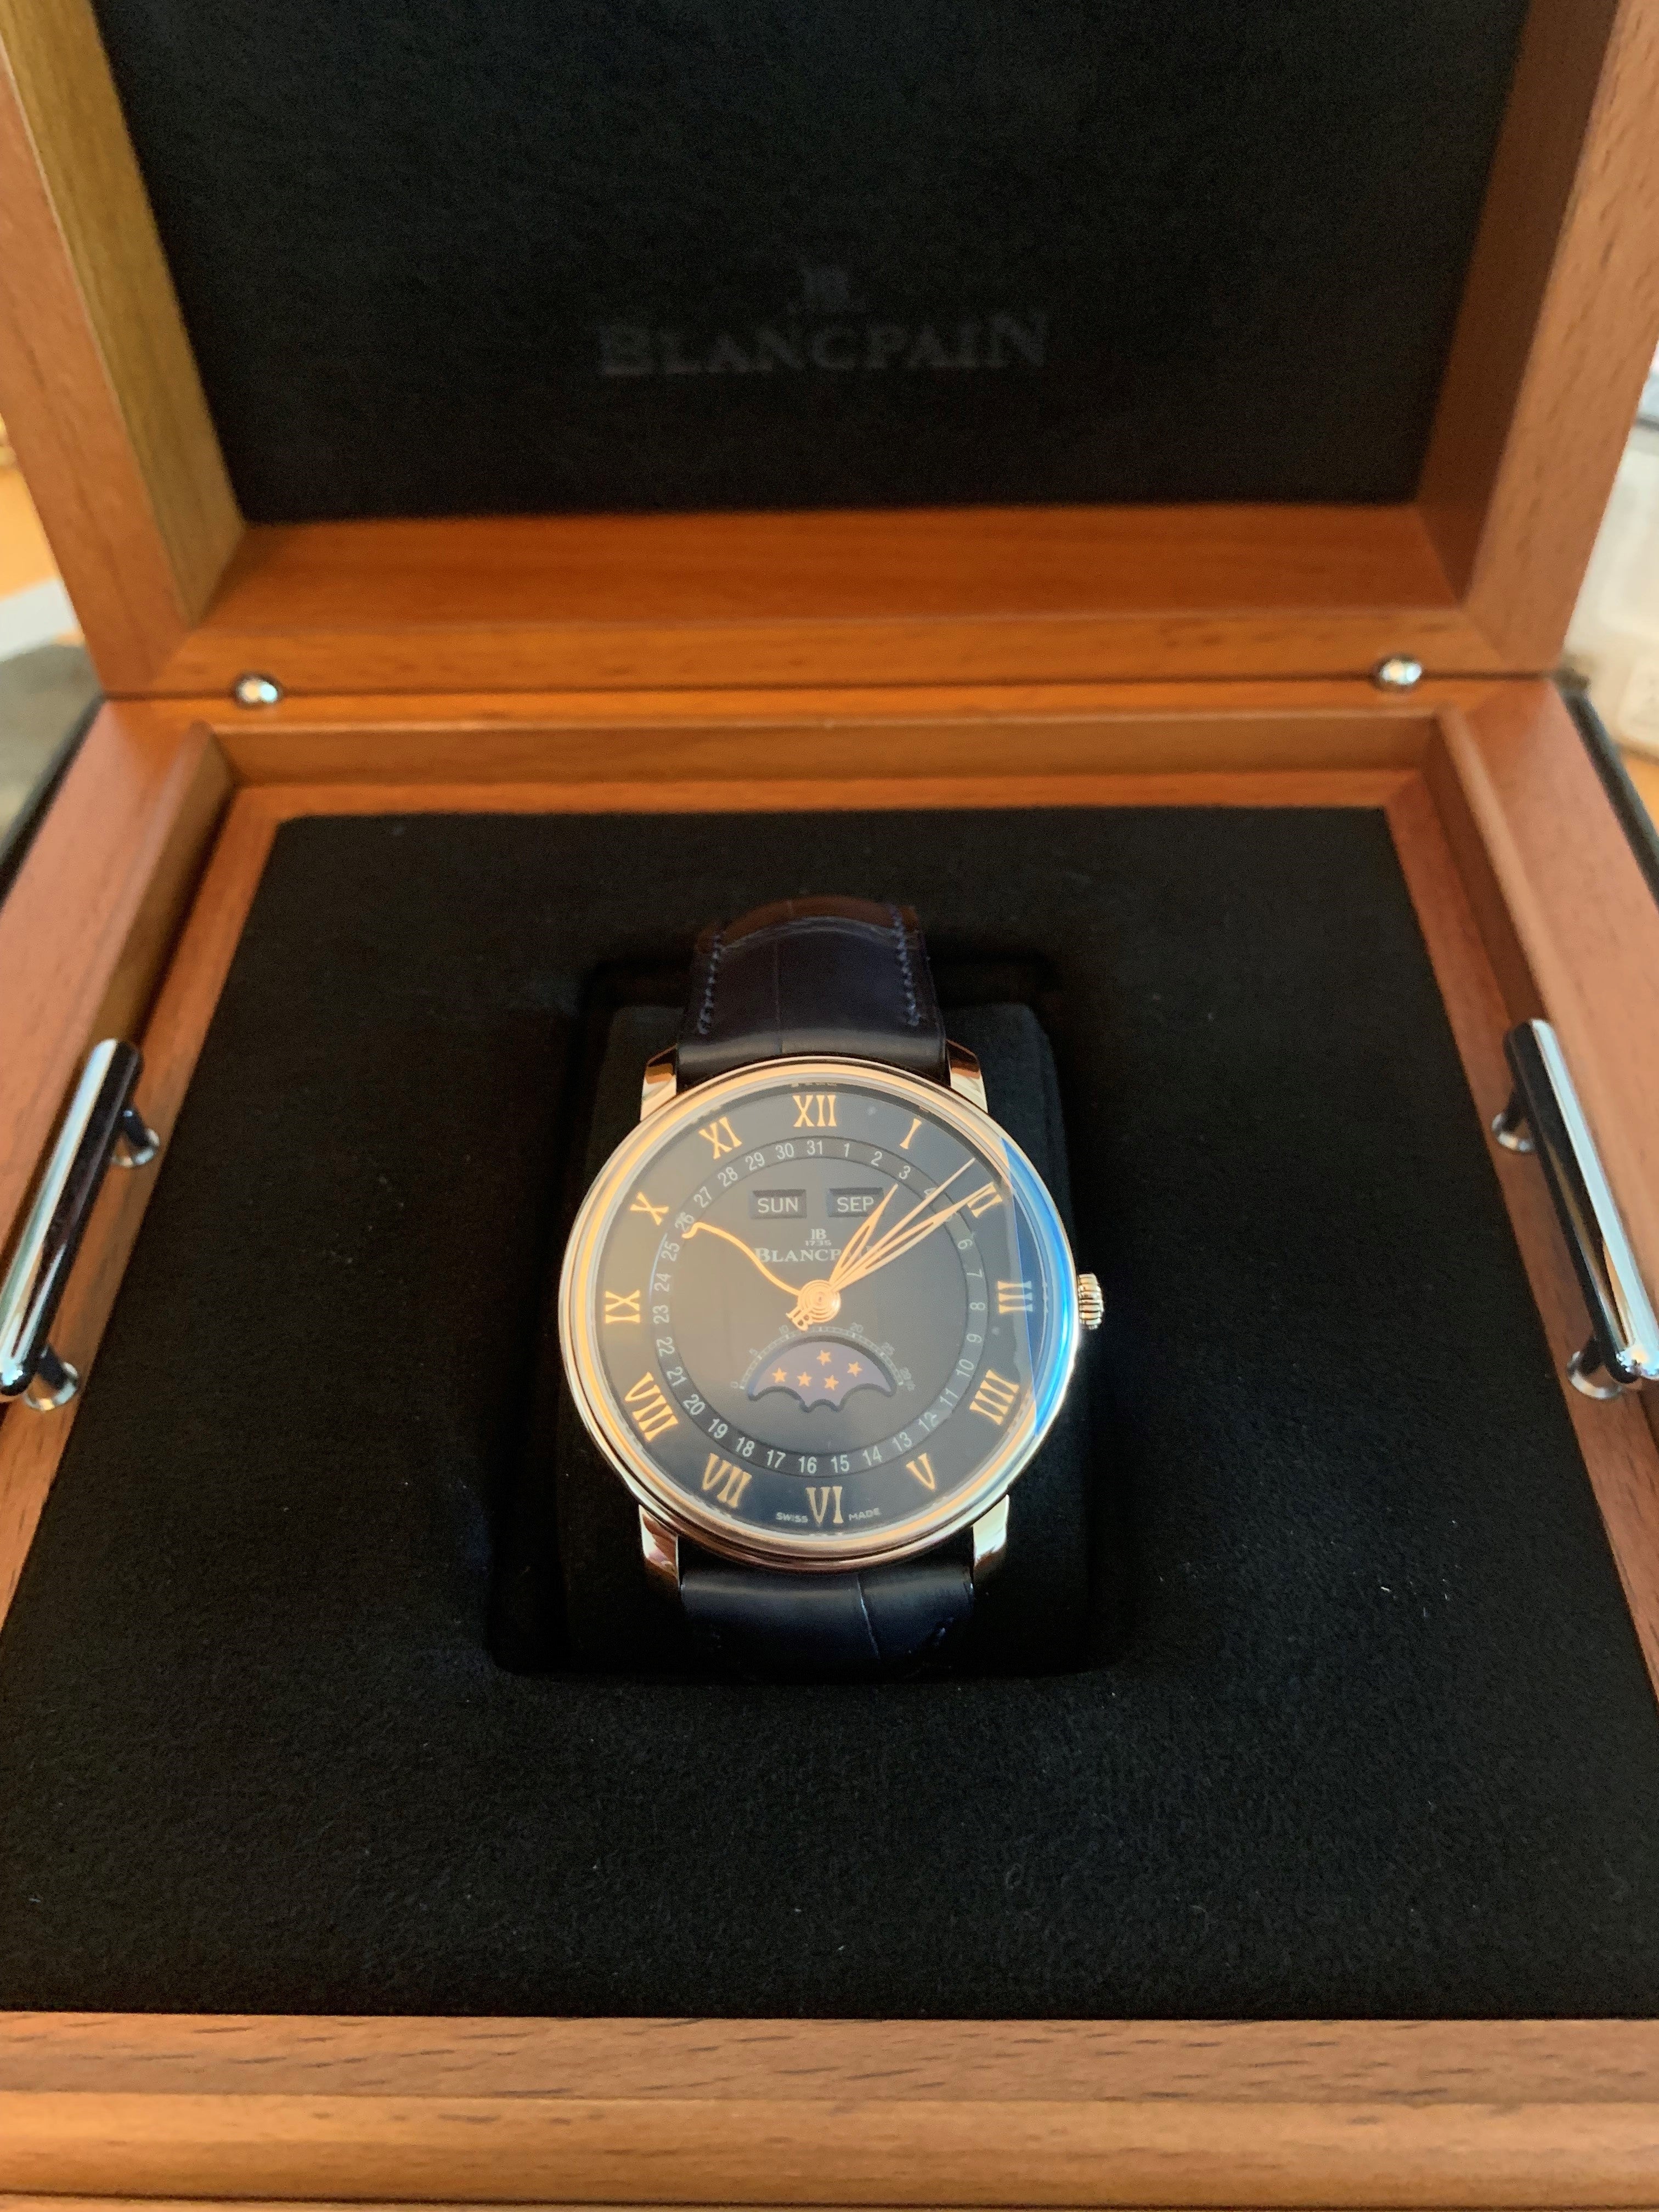 Blancpain Complete Calendar | Luxury Moonphase Watch | Harley's Time